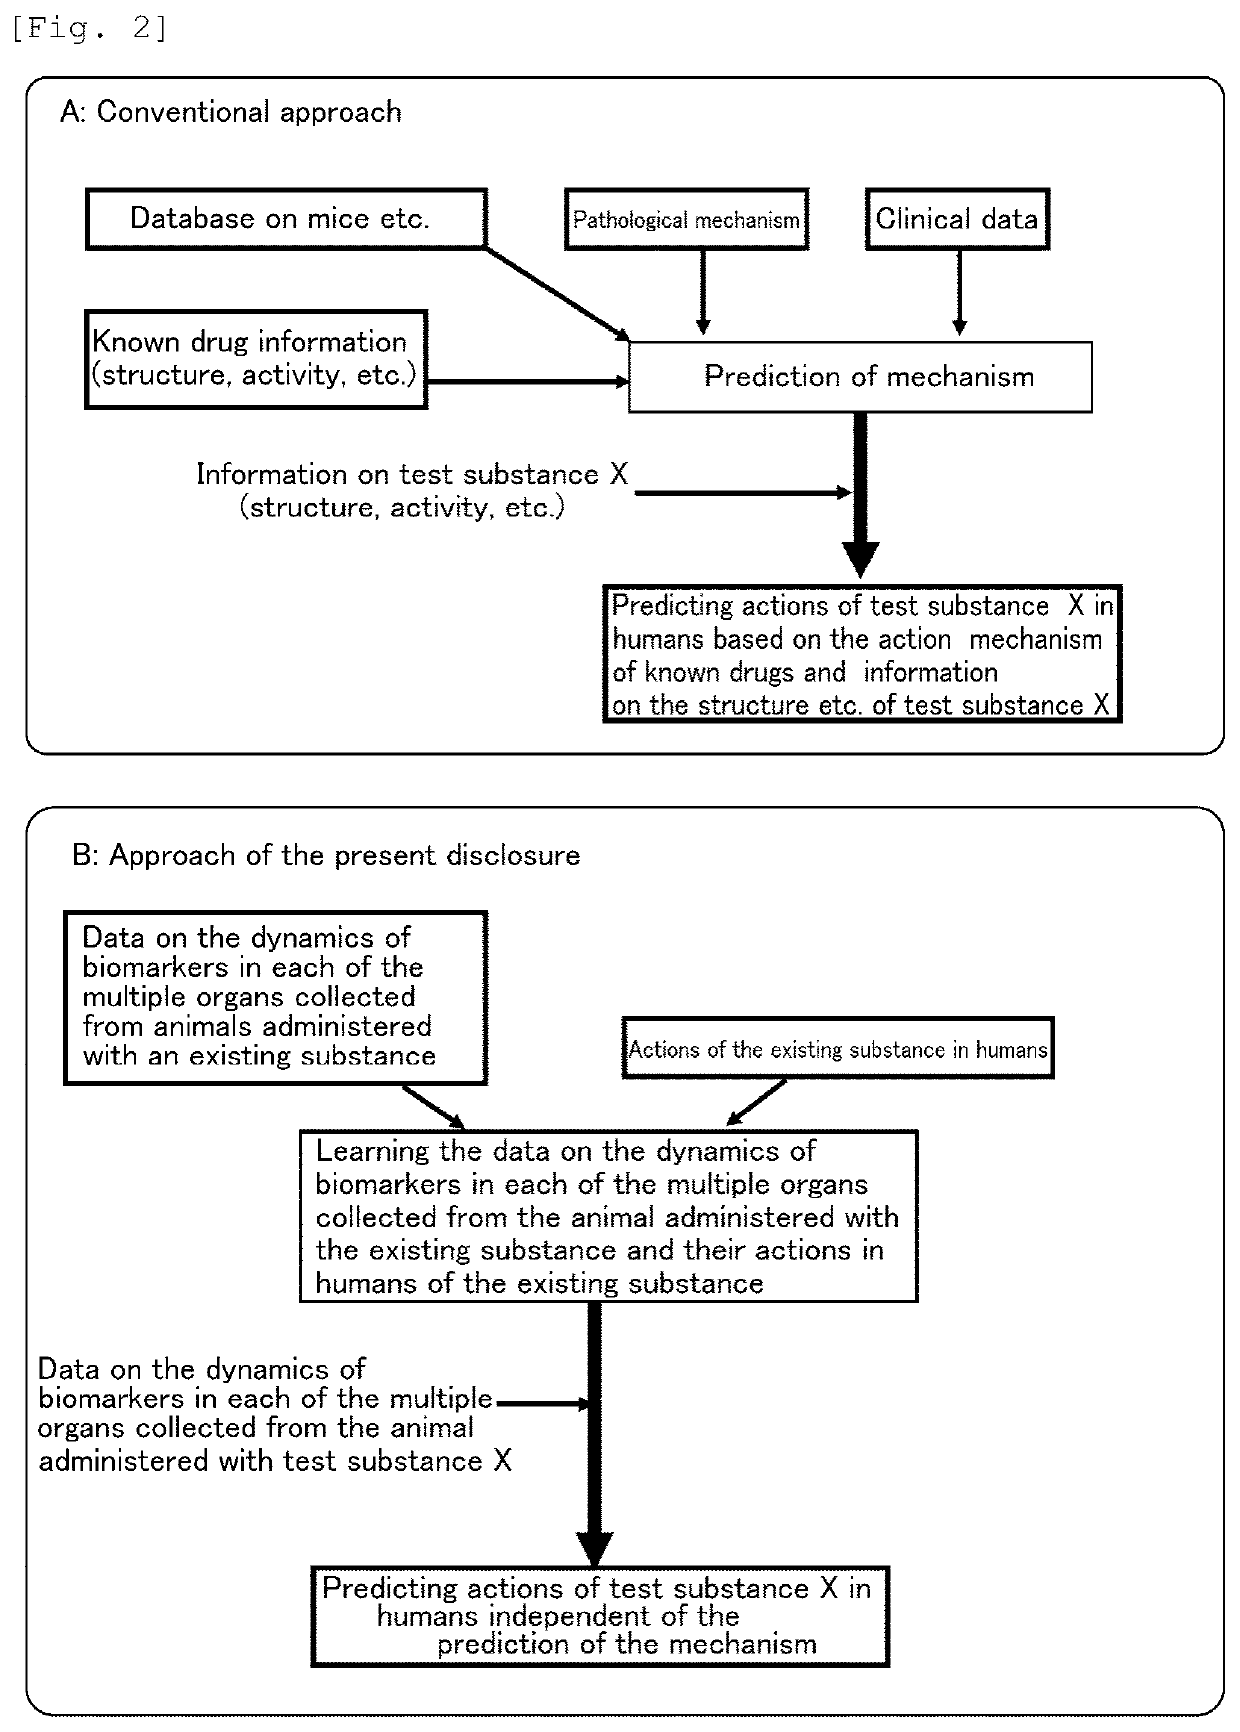 Artificial Intelligence Model for Predicting Actions of Test Substance in Humans